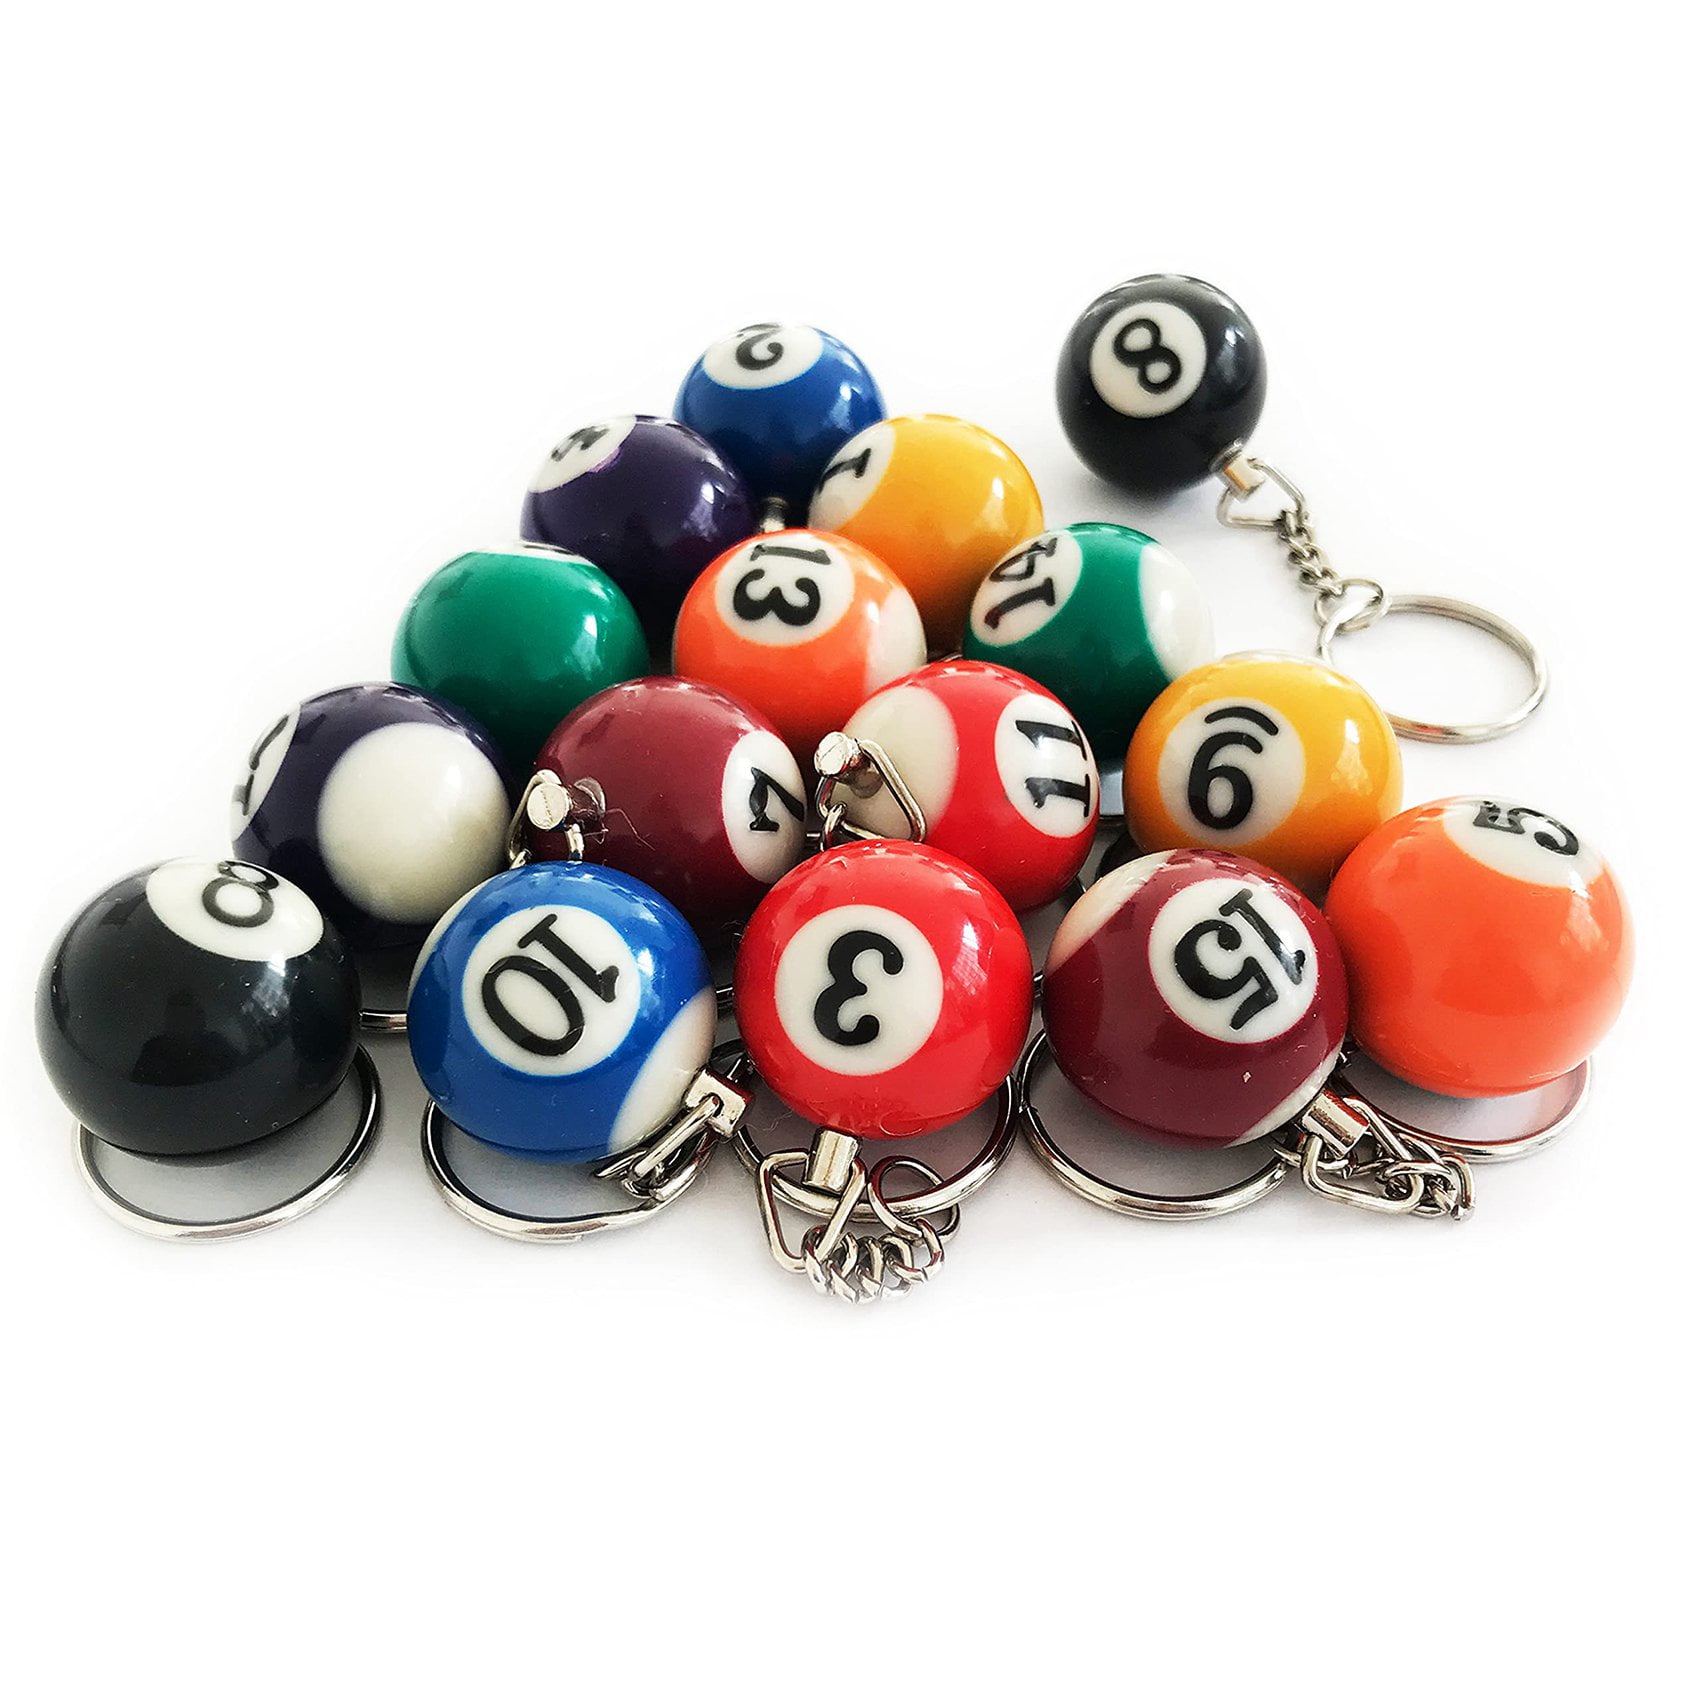 8 Ball Keychain - Accessories & Home Goods